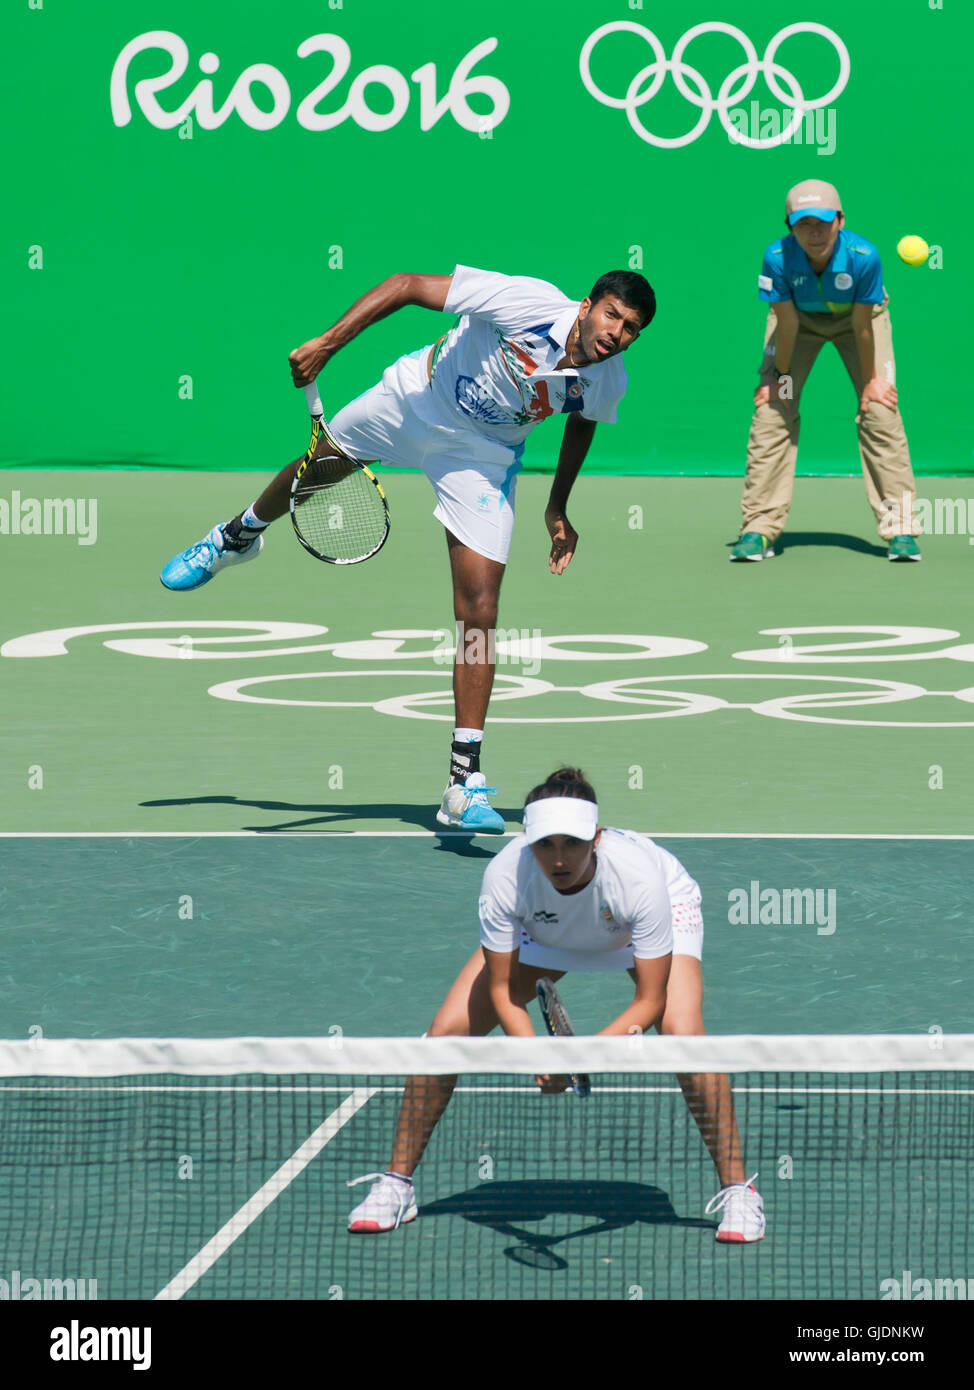 Rio De Janeiro, Brazil. 14th Aug, 2016. Sania Mirza (down) and Rohan Bopanna (up) of India in action during a mixed doubles match at the 2016 Summer Olympics in Rio de Janeiro, Brazil, August 14, 2016. © Vit Simanek/CTK Photo/Alamy Live News Stock Photo